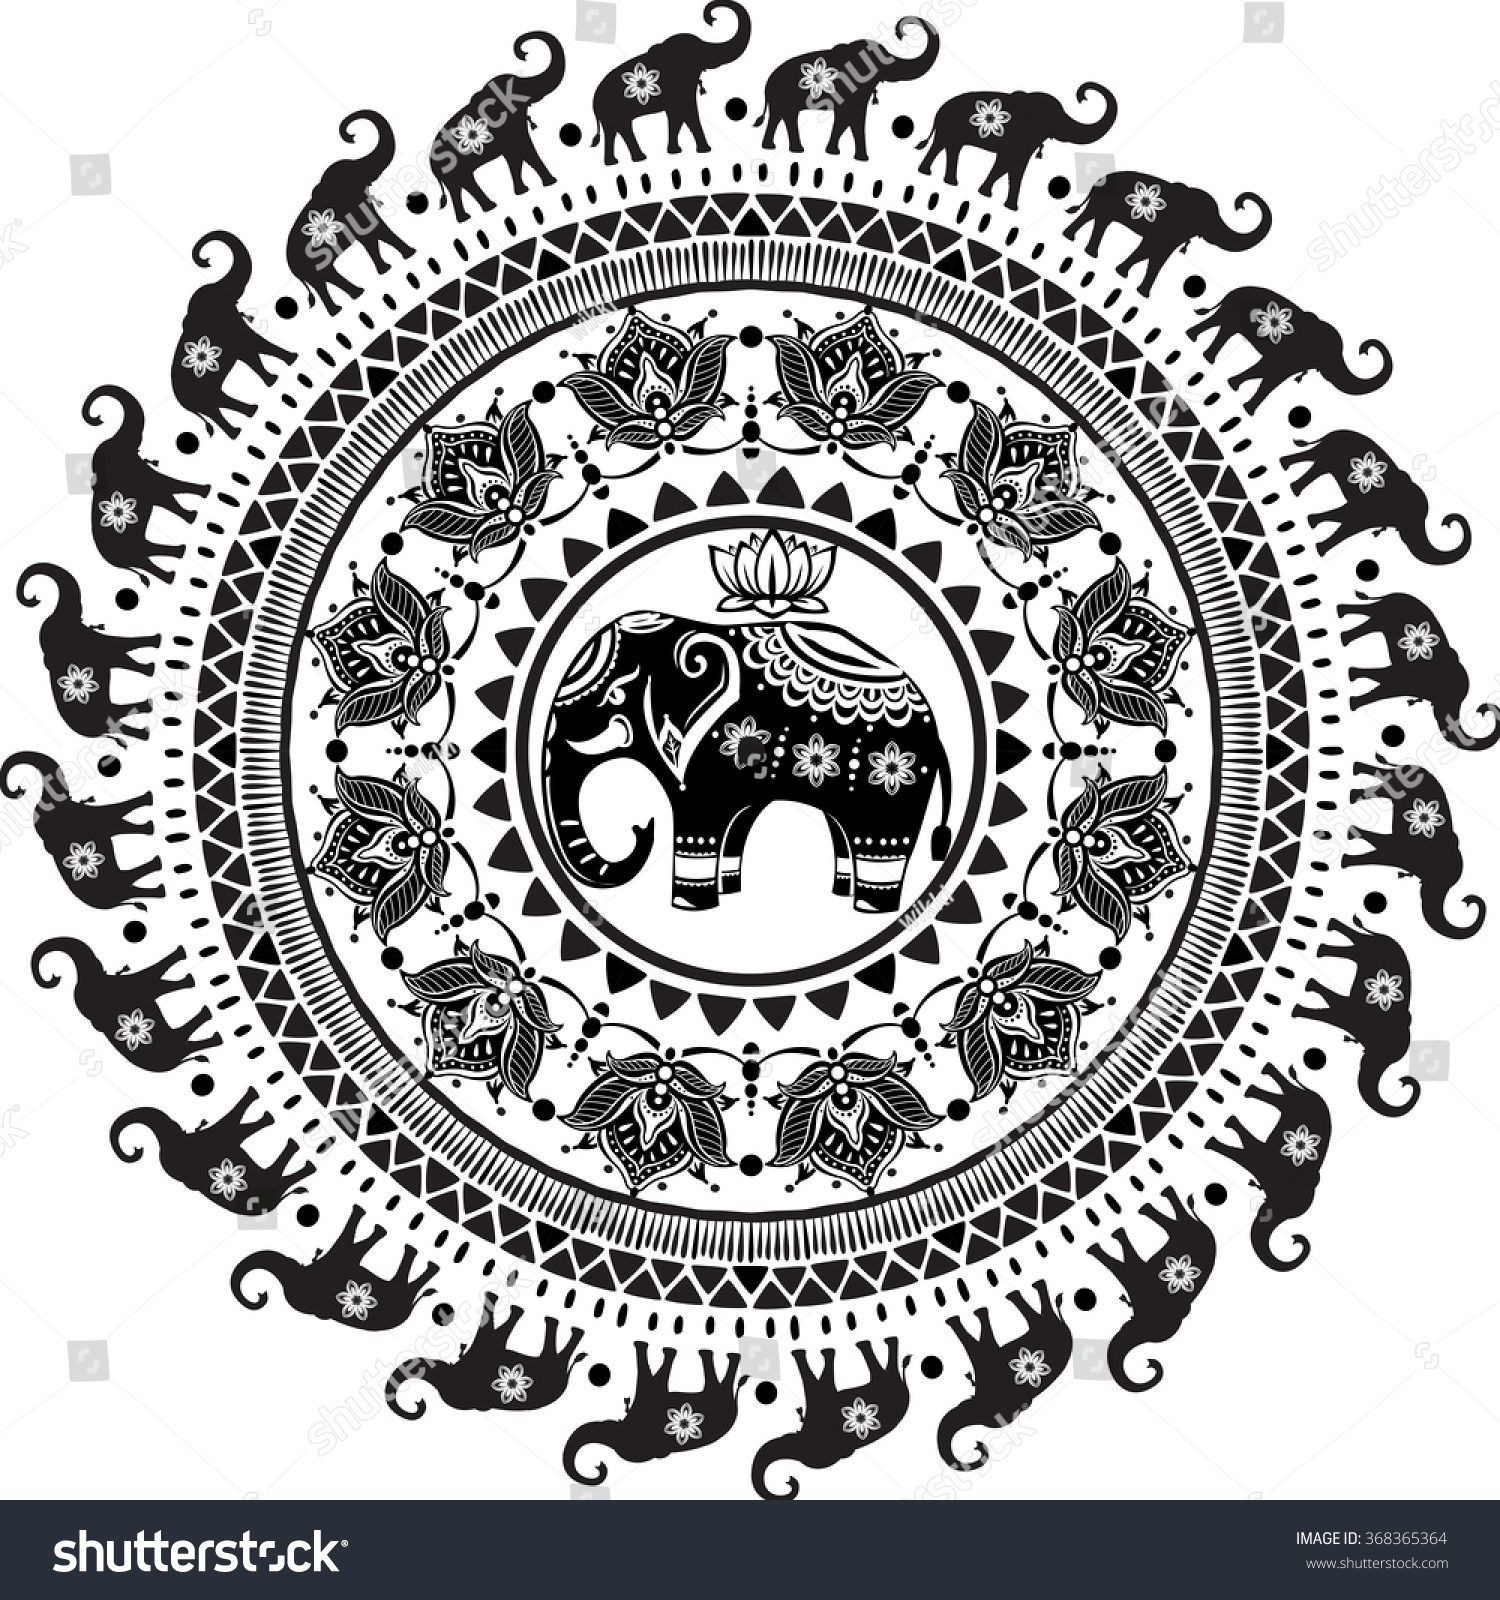 SVG of Round pattern with decorated elephants svg